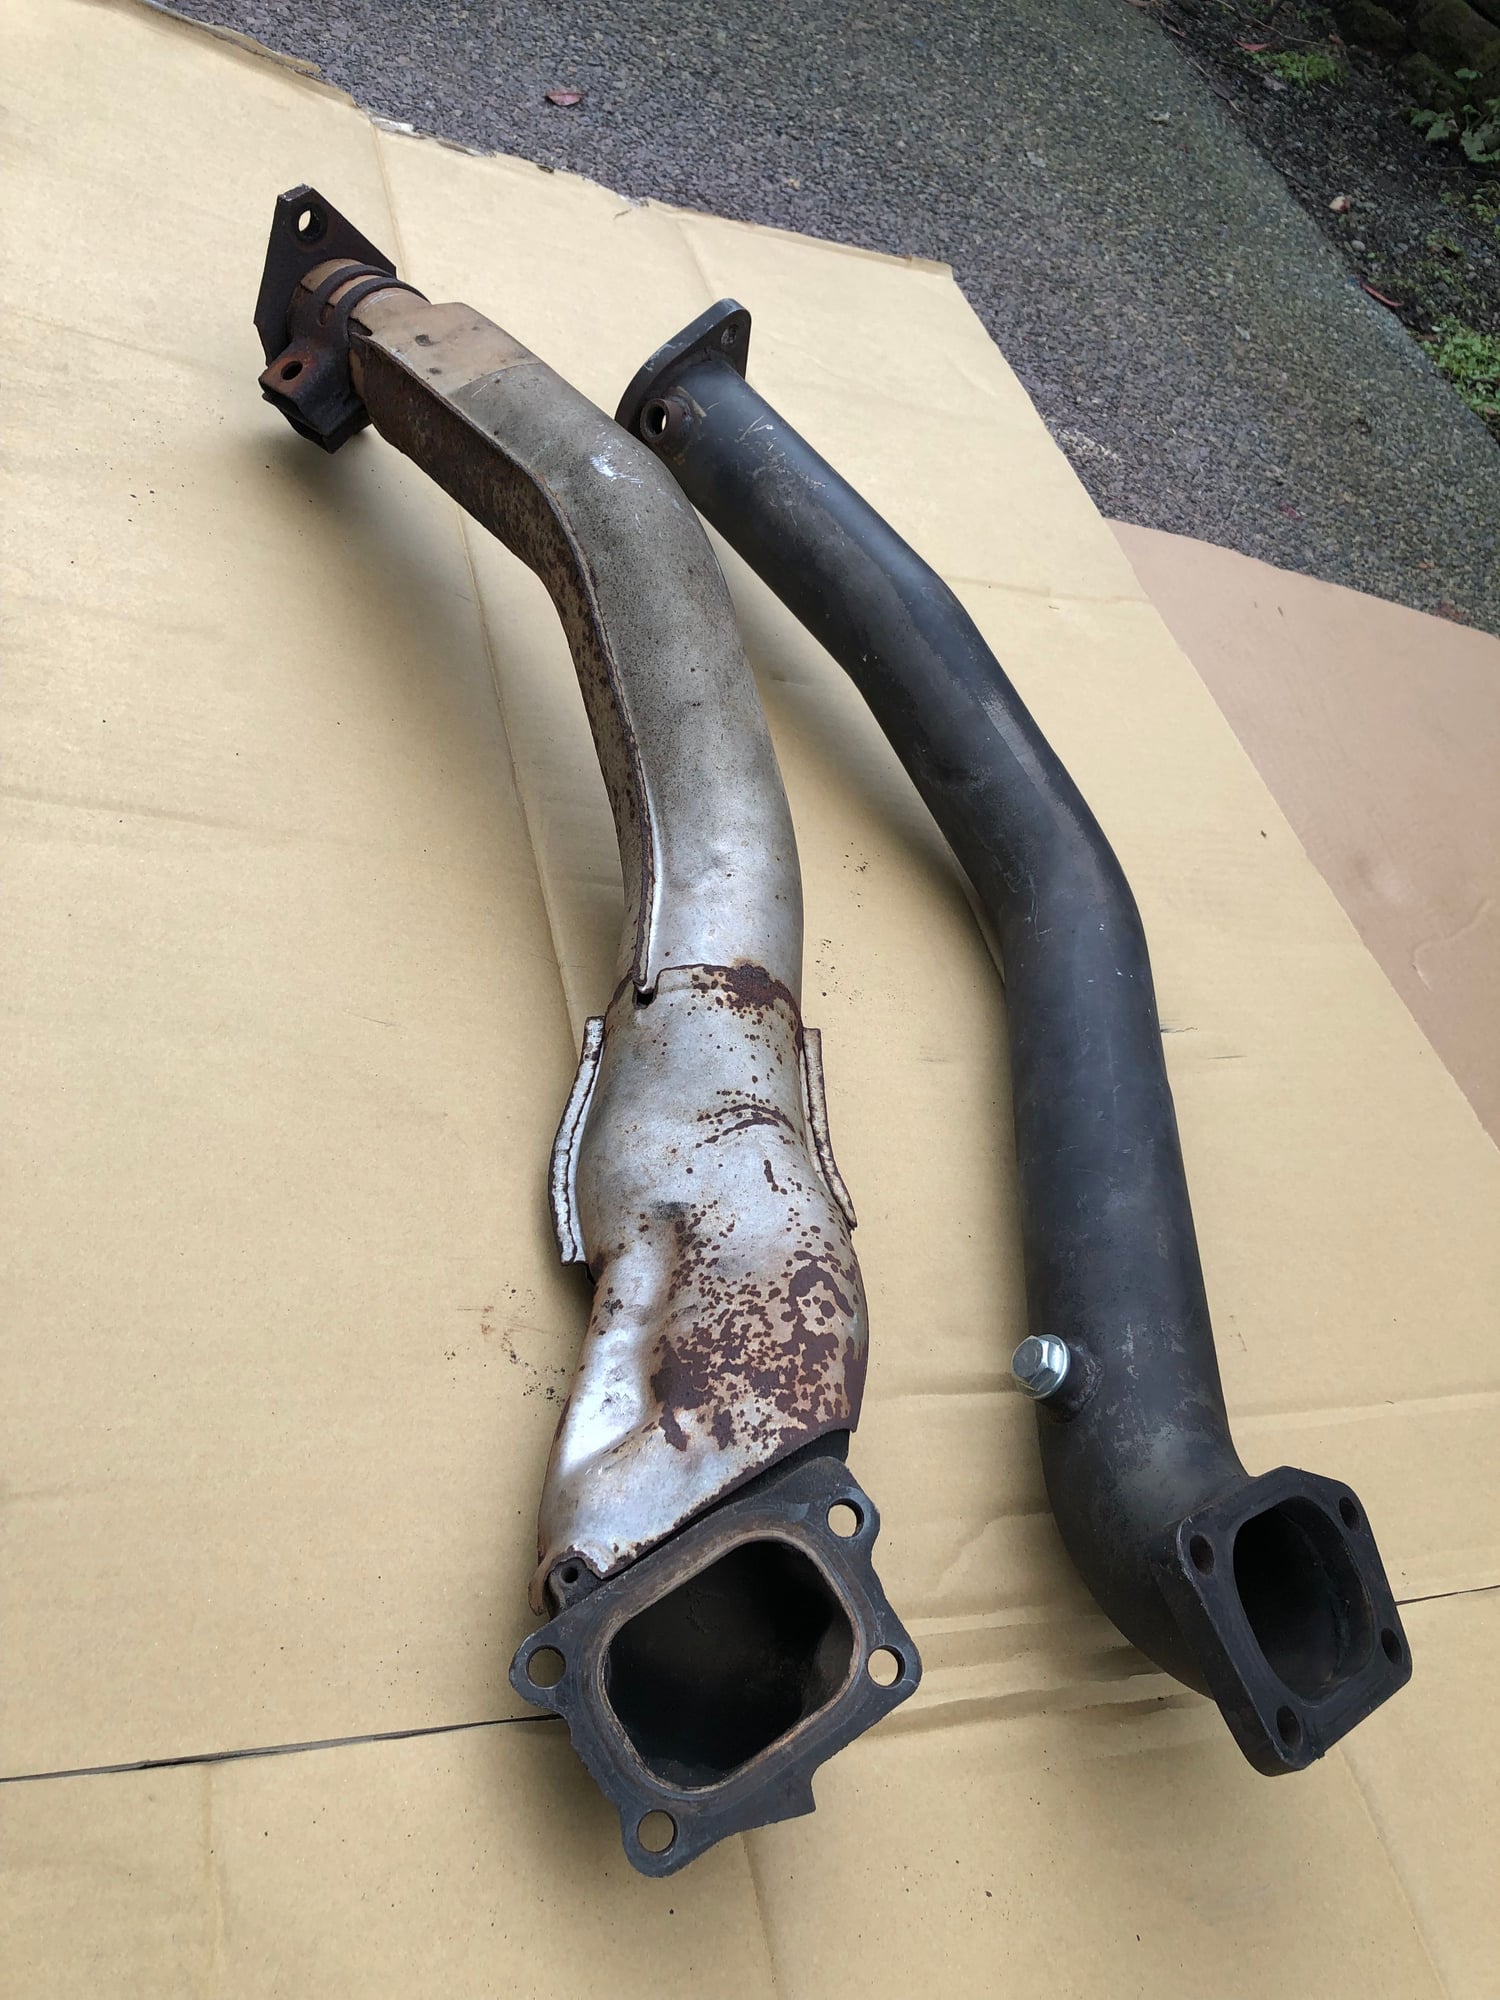 Engine - Exhaust - JDM OEM & Petit Racing Down Pipes - Used - 1992 to 2002 Mazda RX-7 - Seattle, WA 98122, United States